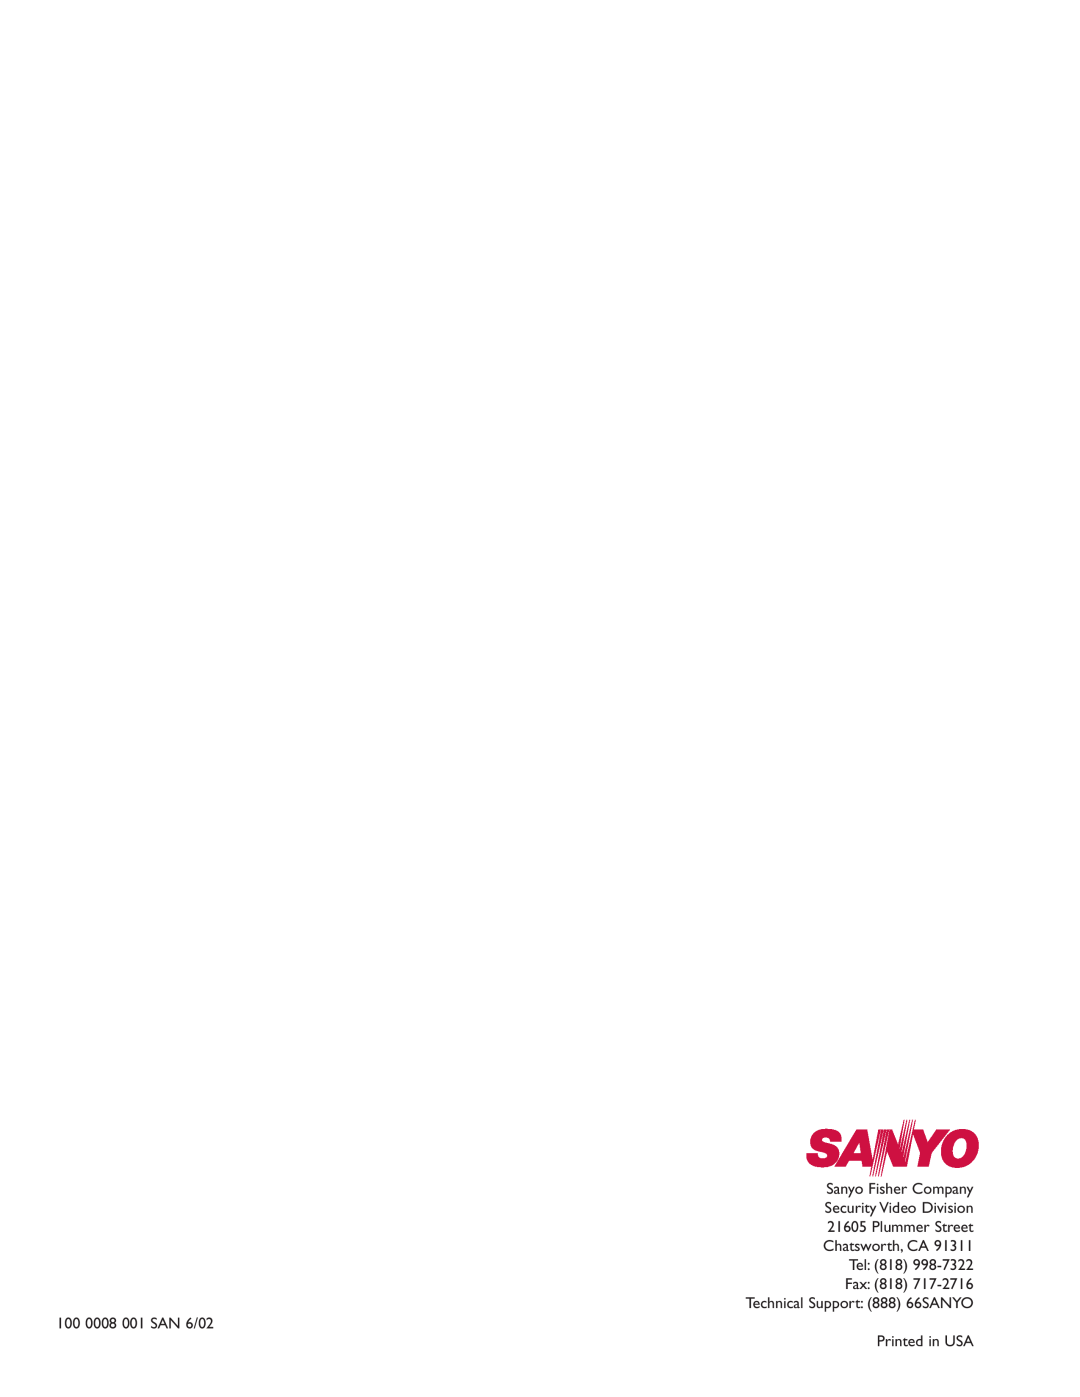 Sanyo VSE-6300 Sanyo Fisher Company Security Video Division, Plummer Street, Technical Support 888 66SANYO 